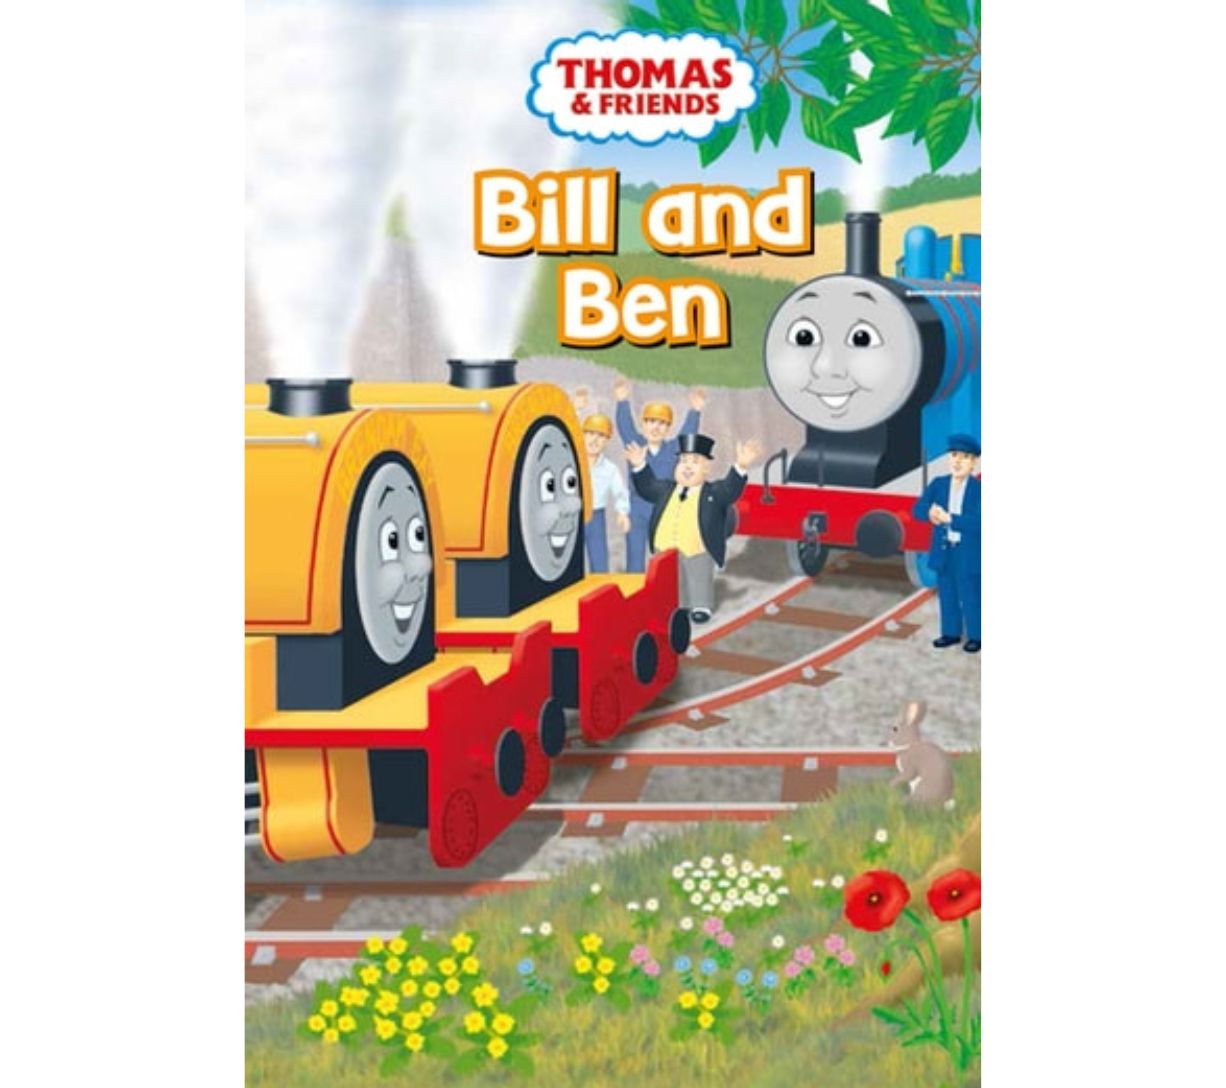 Thomas and Friends - Bill and Ben